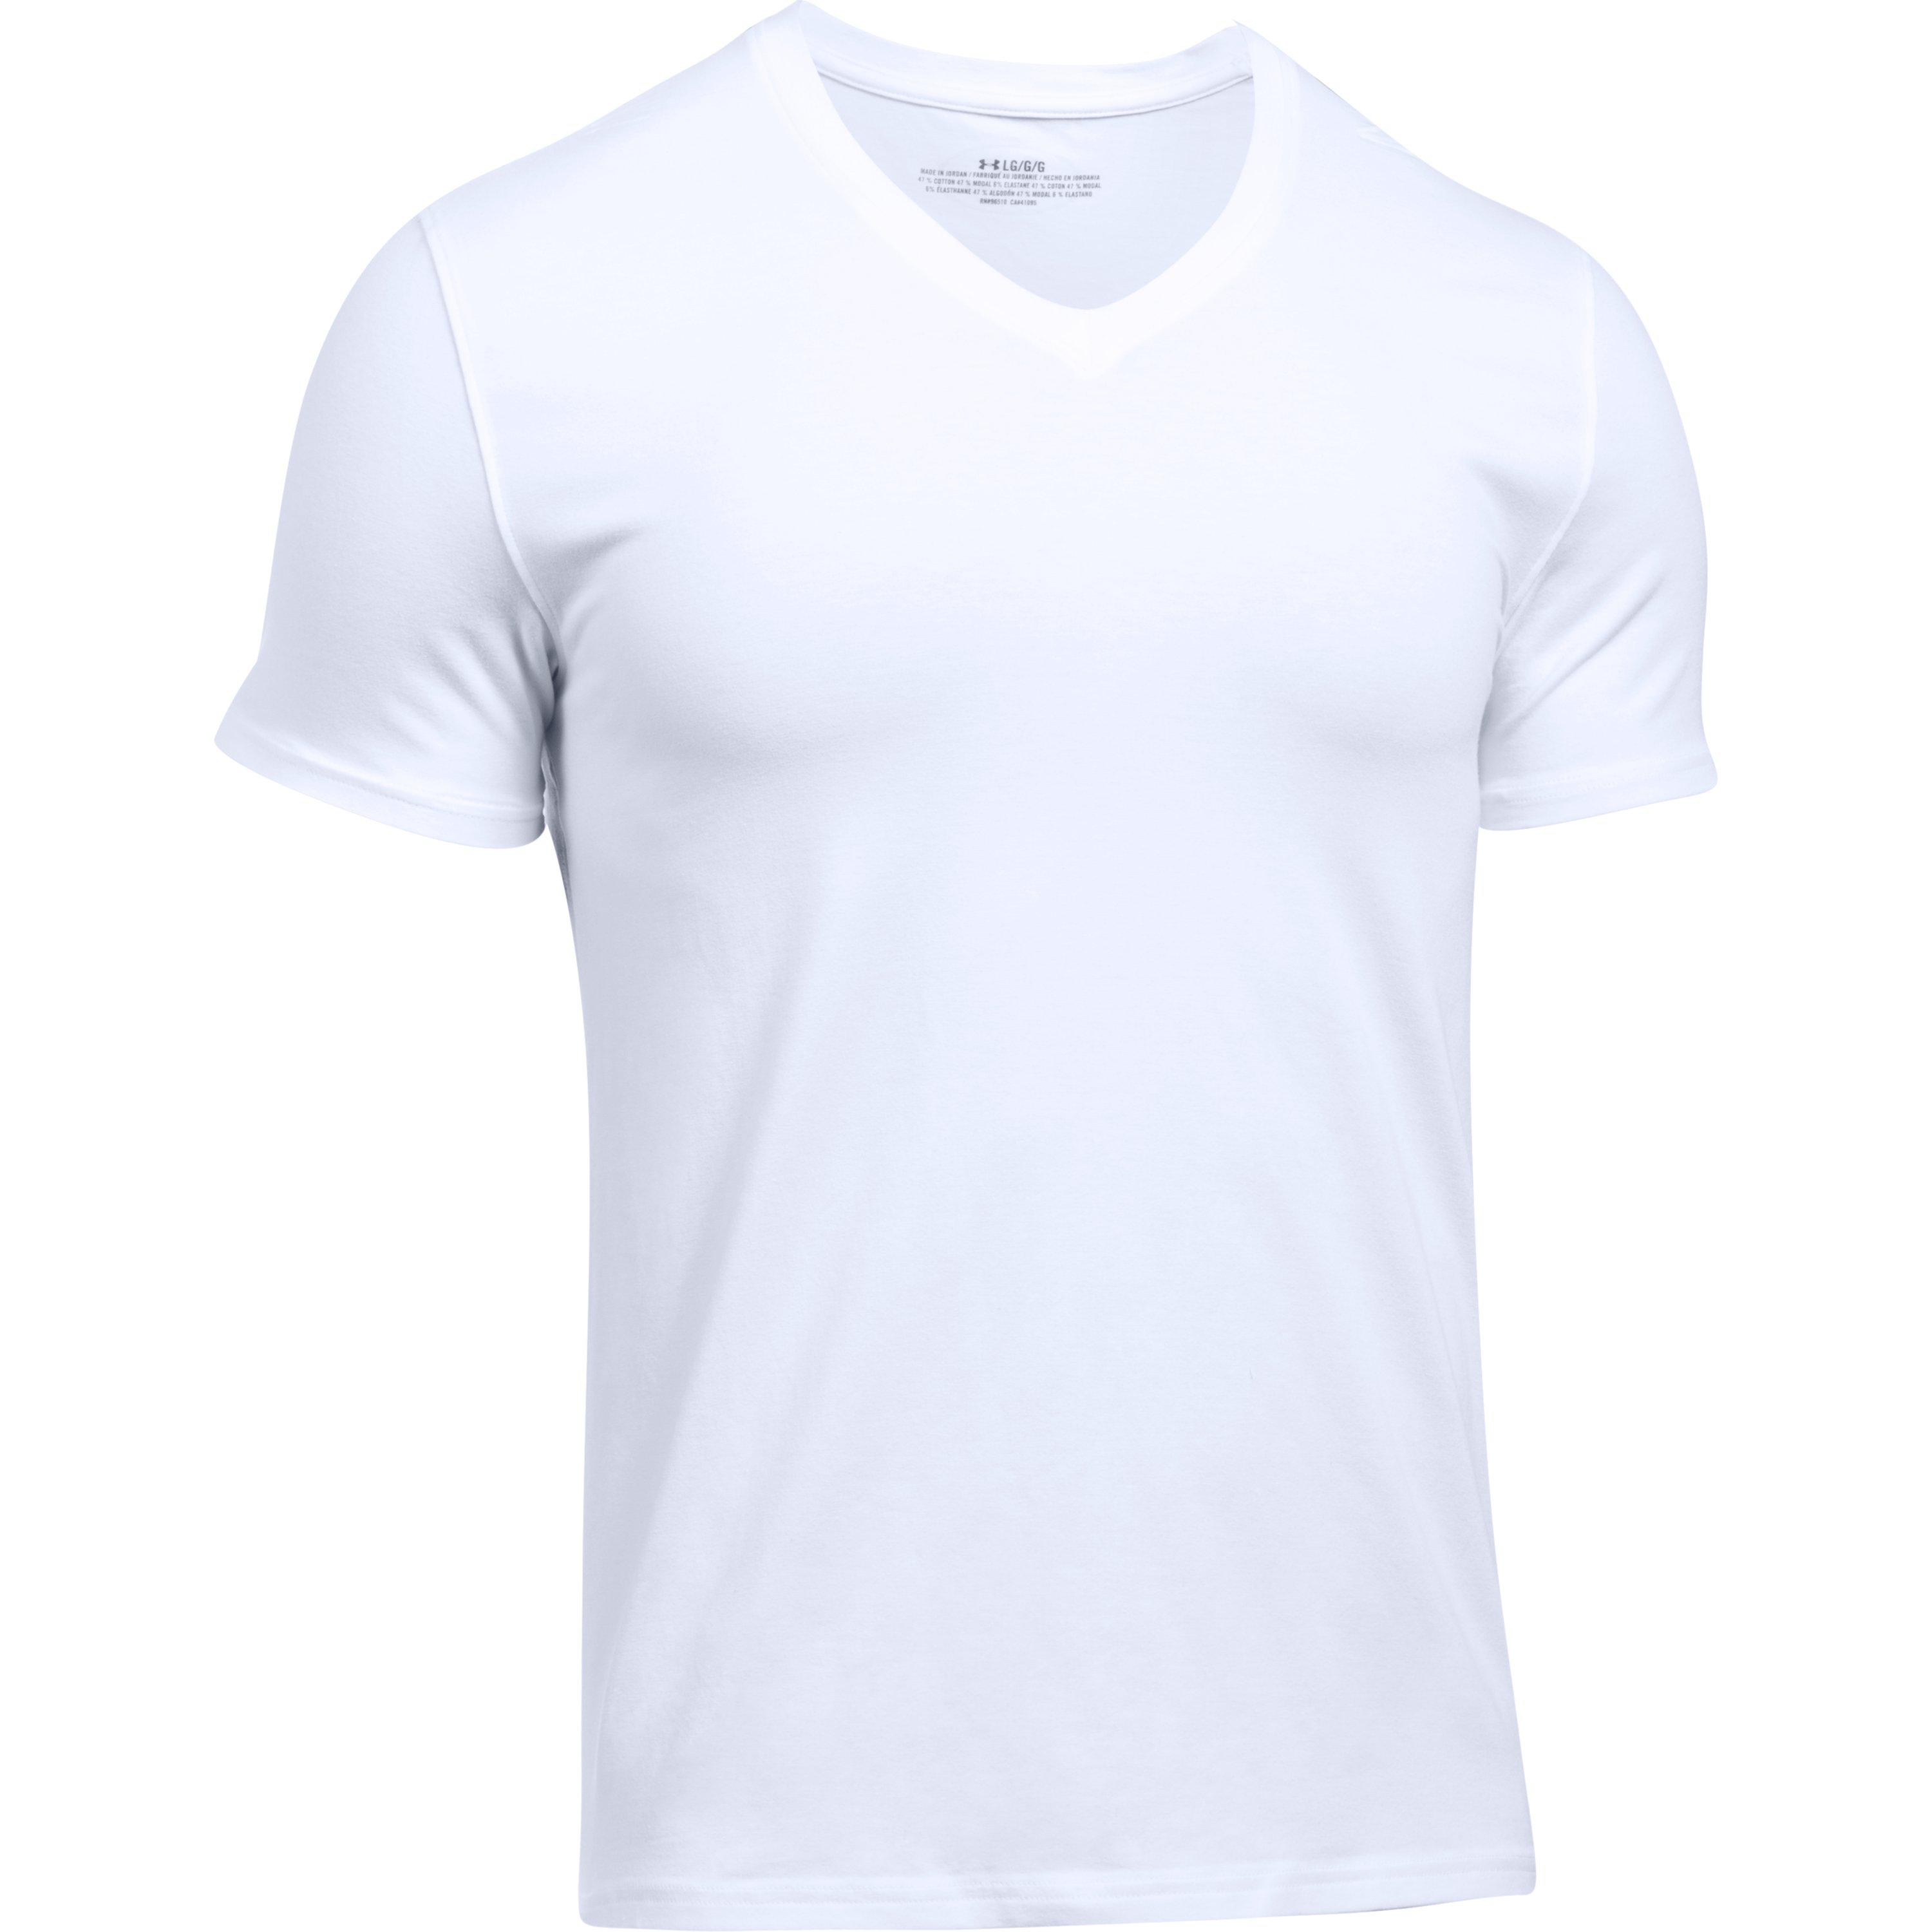 Under Armour Men's Ua Cotton Stretch V-neck Undershirt – 2-pack in ...